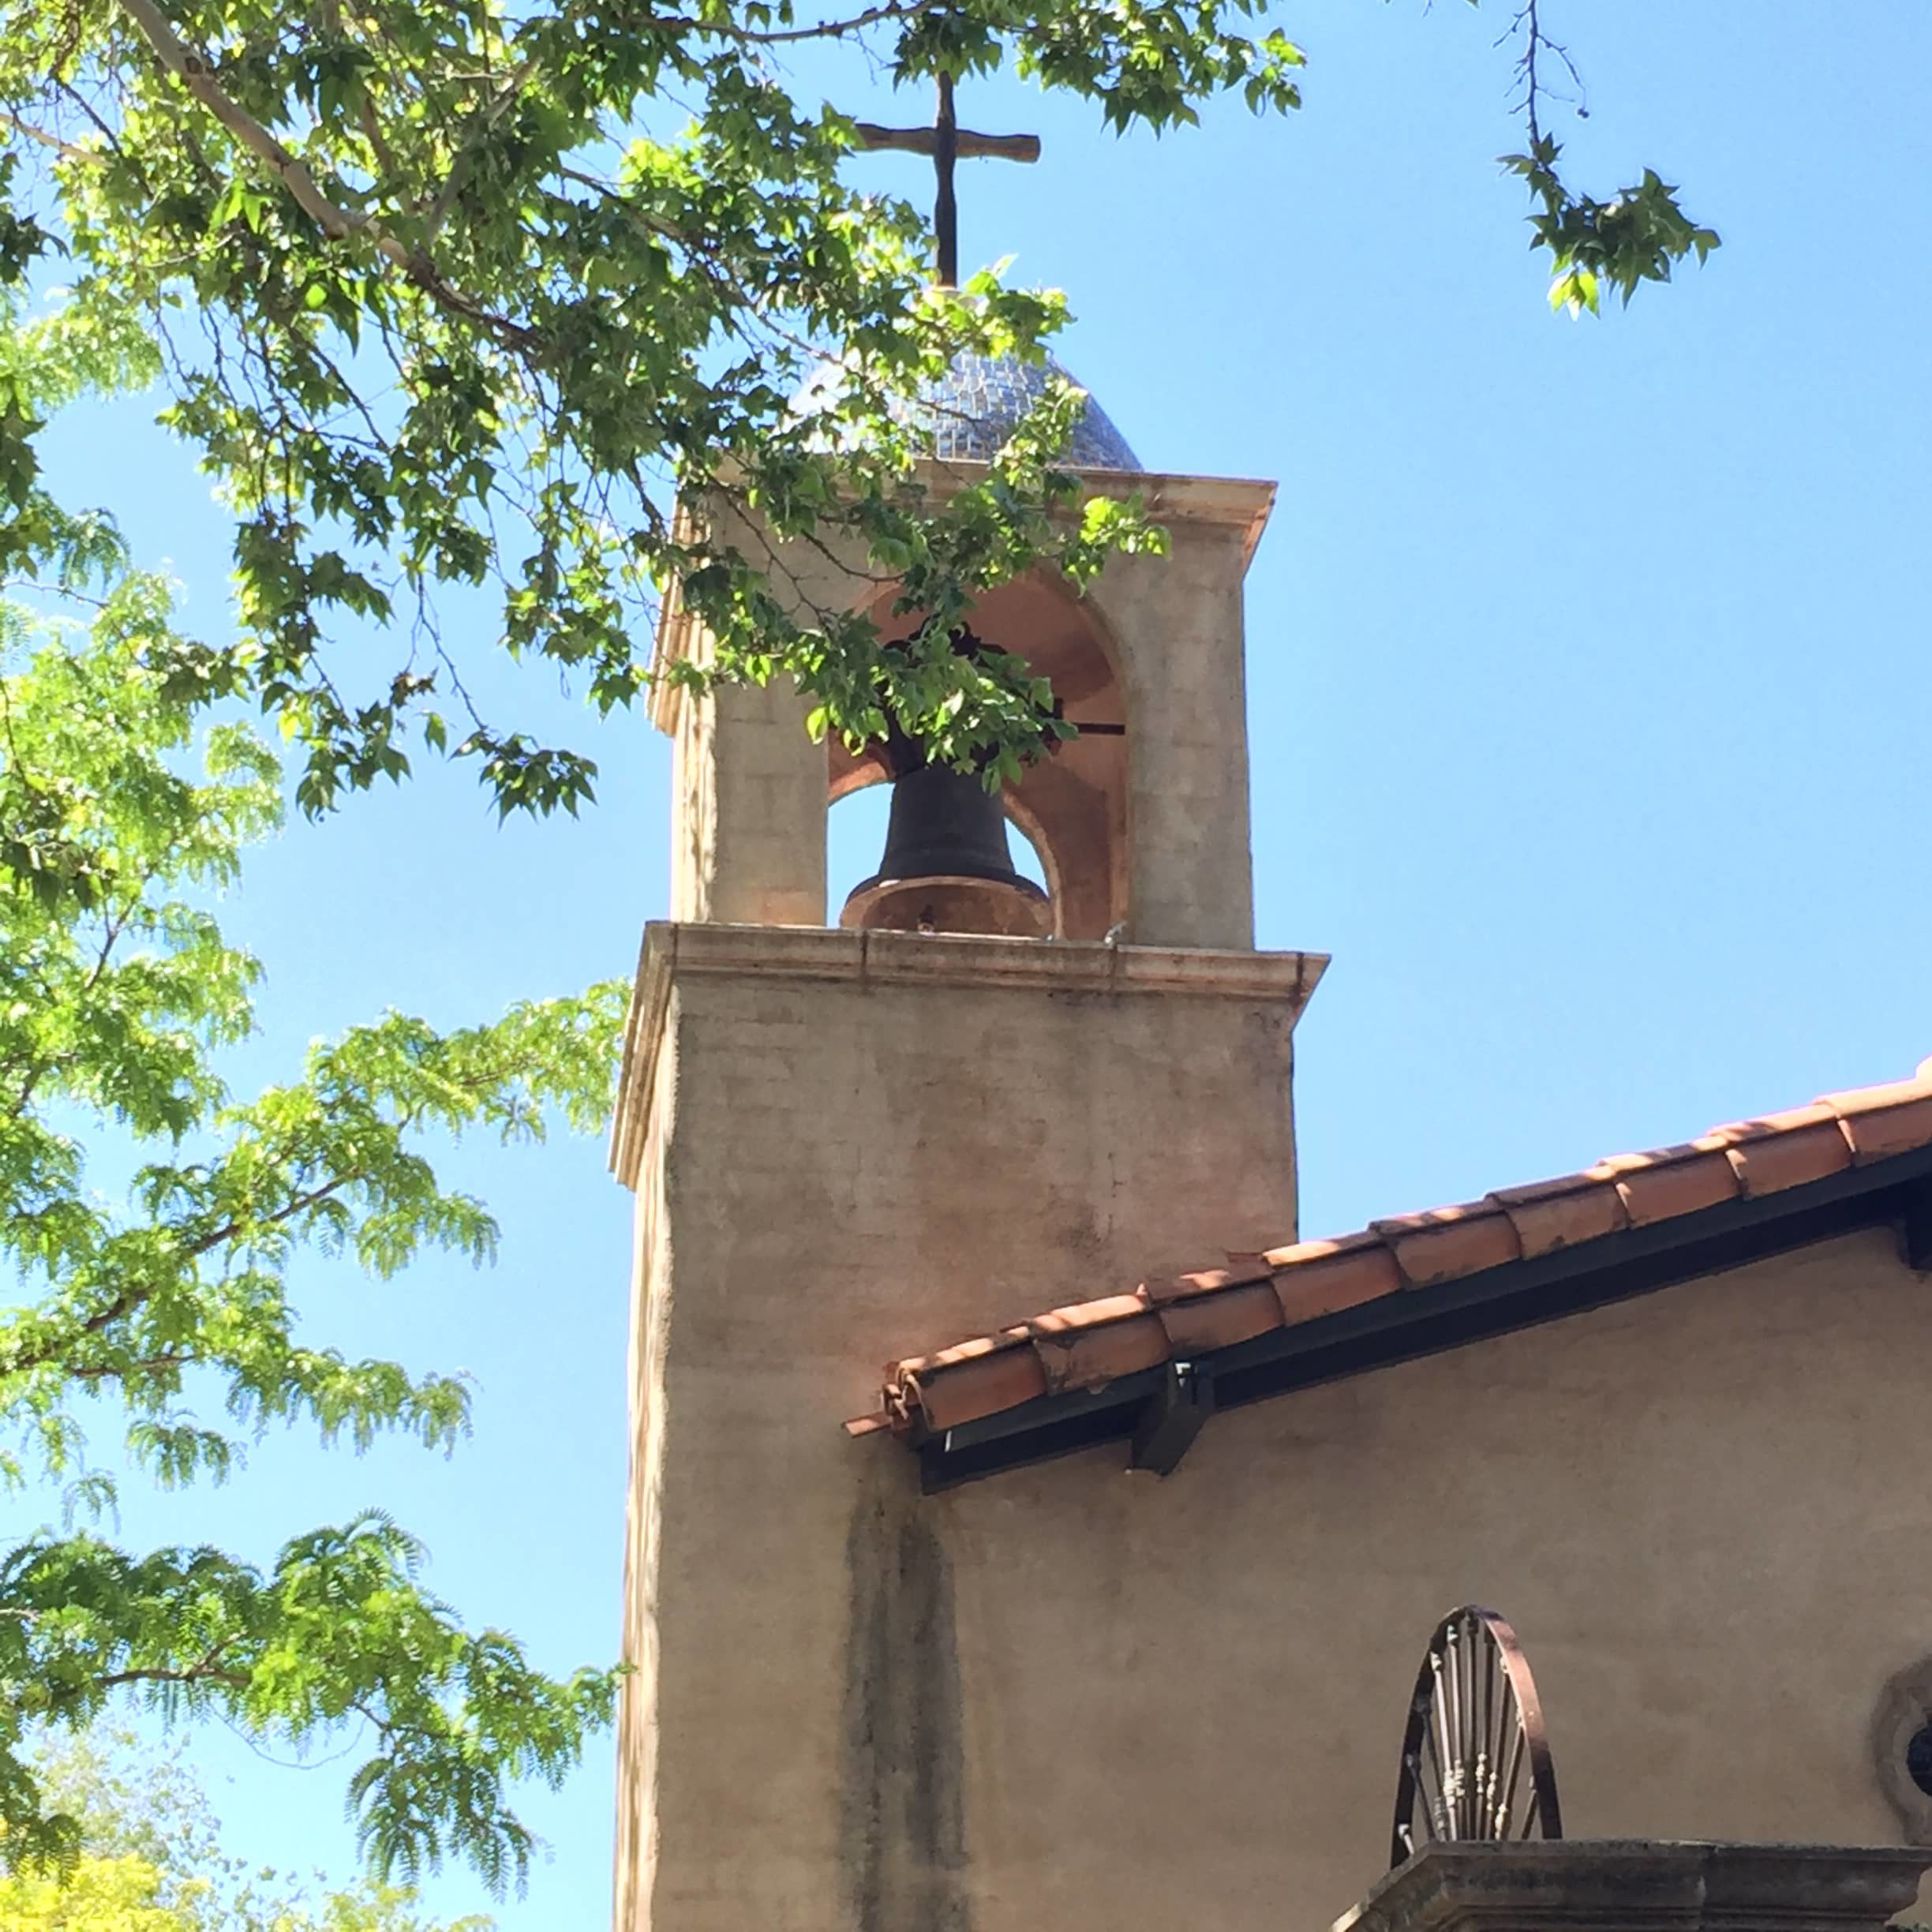 old church with bell and cross